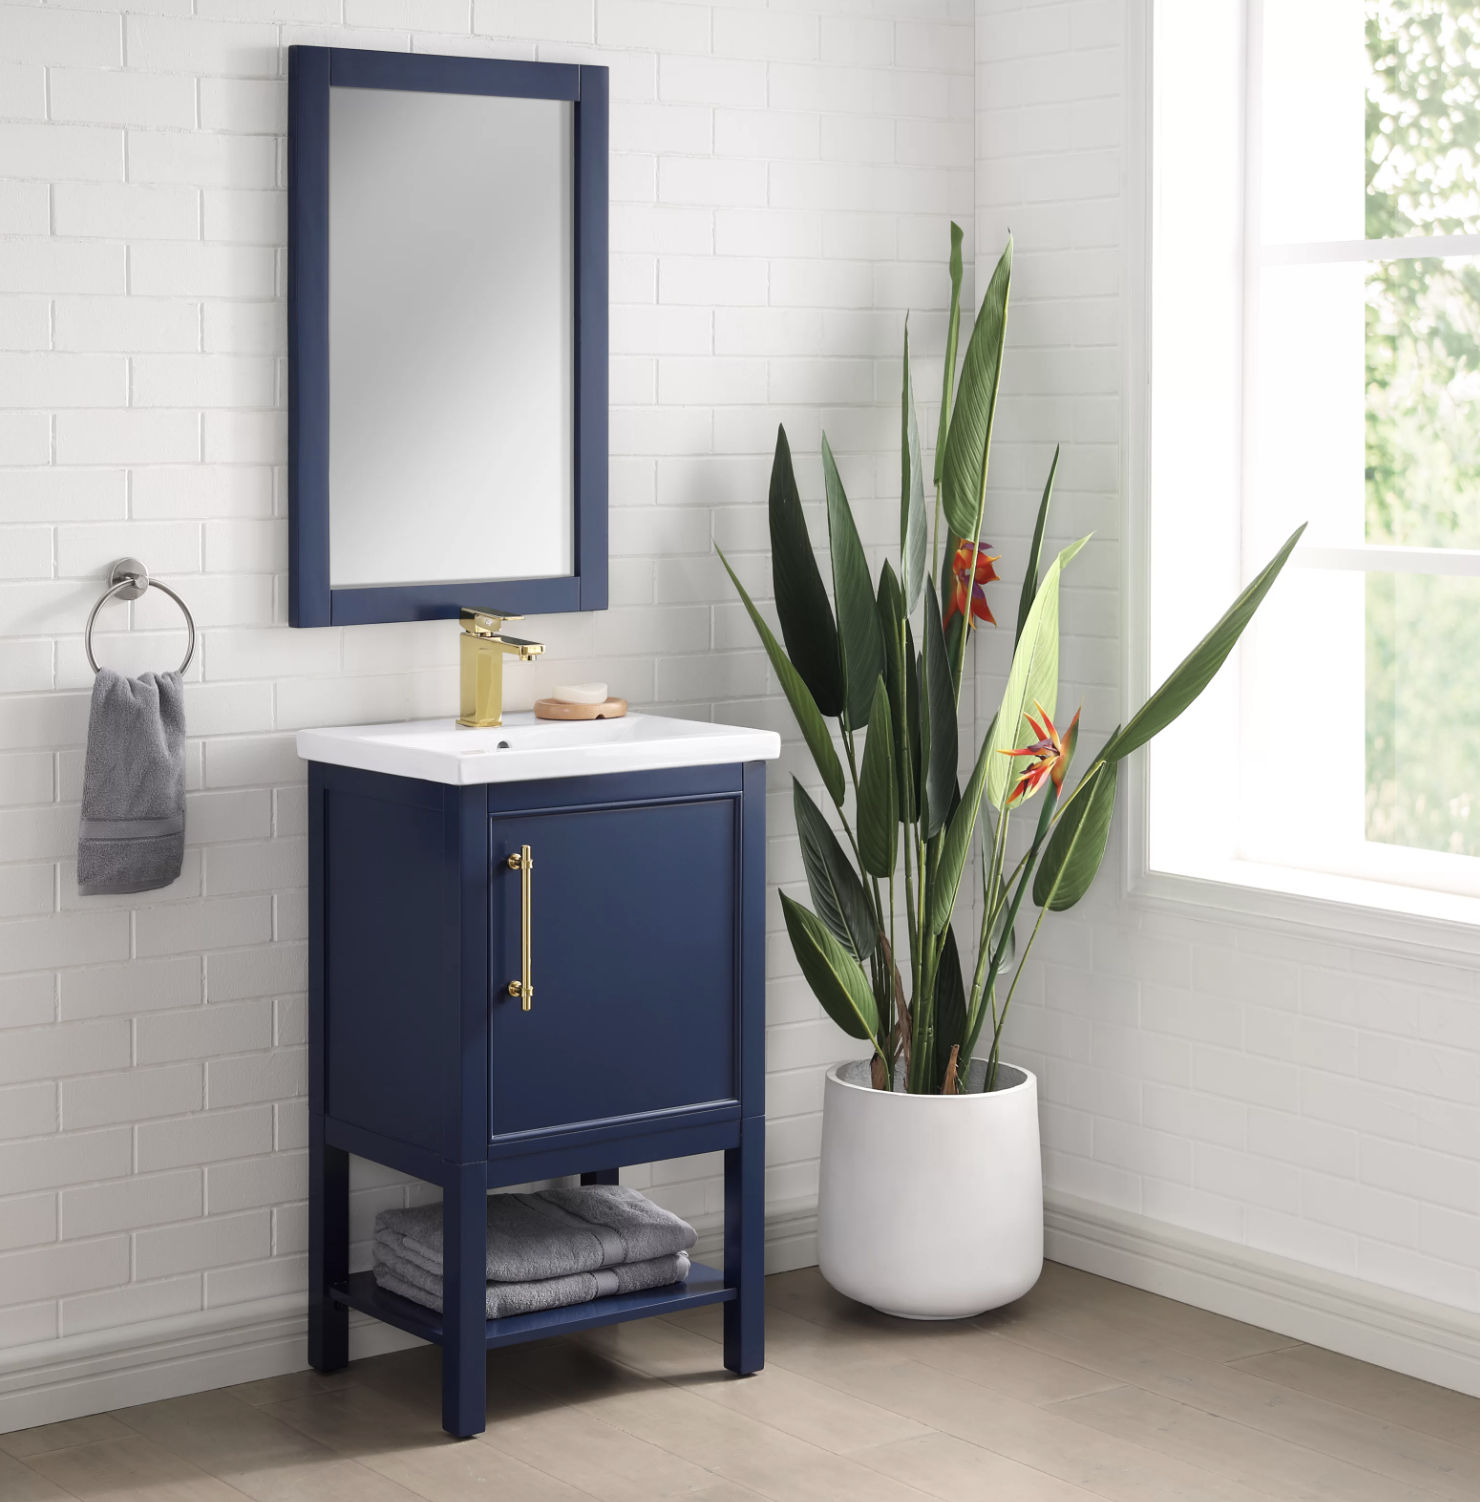 A navy blue bathroom vanity set with gold detailing